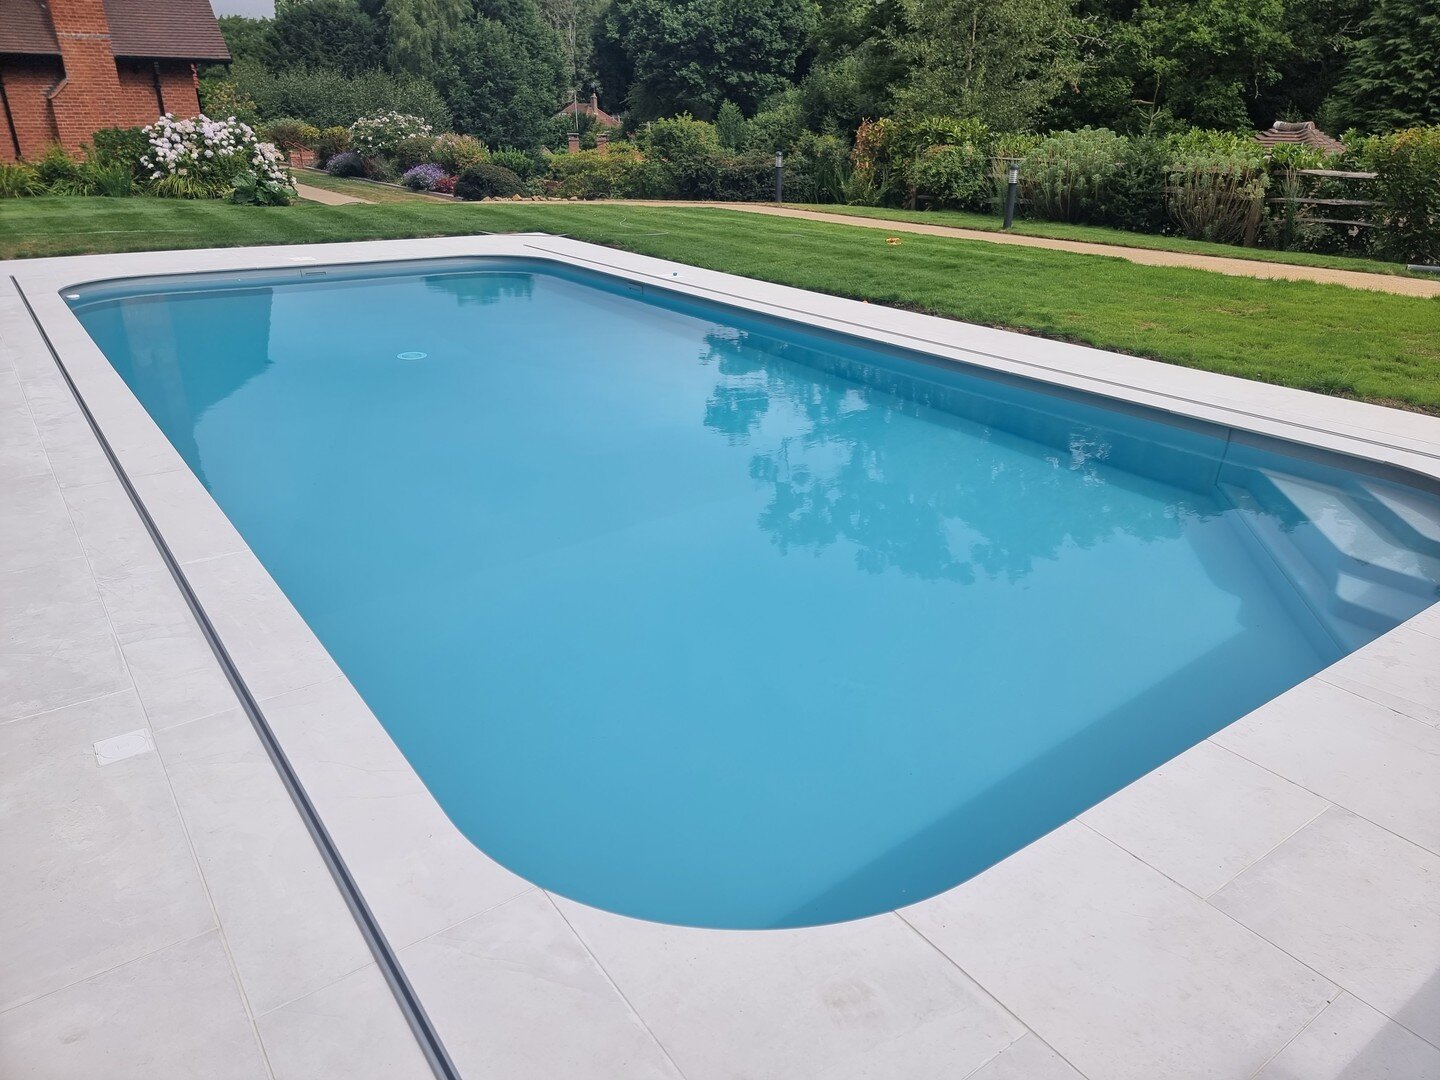 Swimming pool installation &amp; coping surround completed by #NautilusPools. Large format Comblanchien Porcelain paving from #LondonStone.

Measure twice, cut once - I actually measured 3 or 4 times to ensure the specification was accurate to the mm